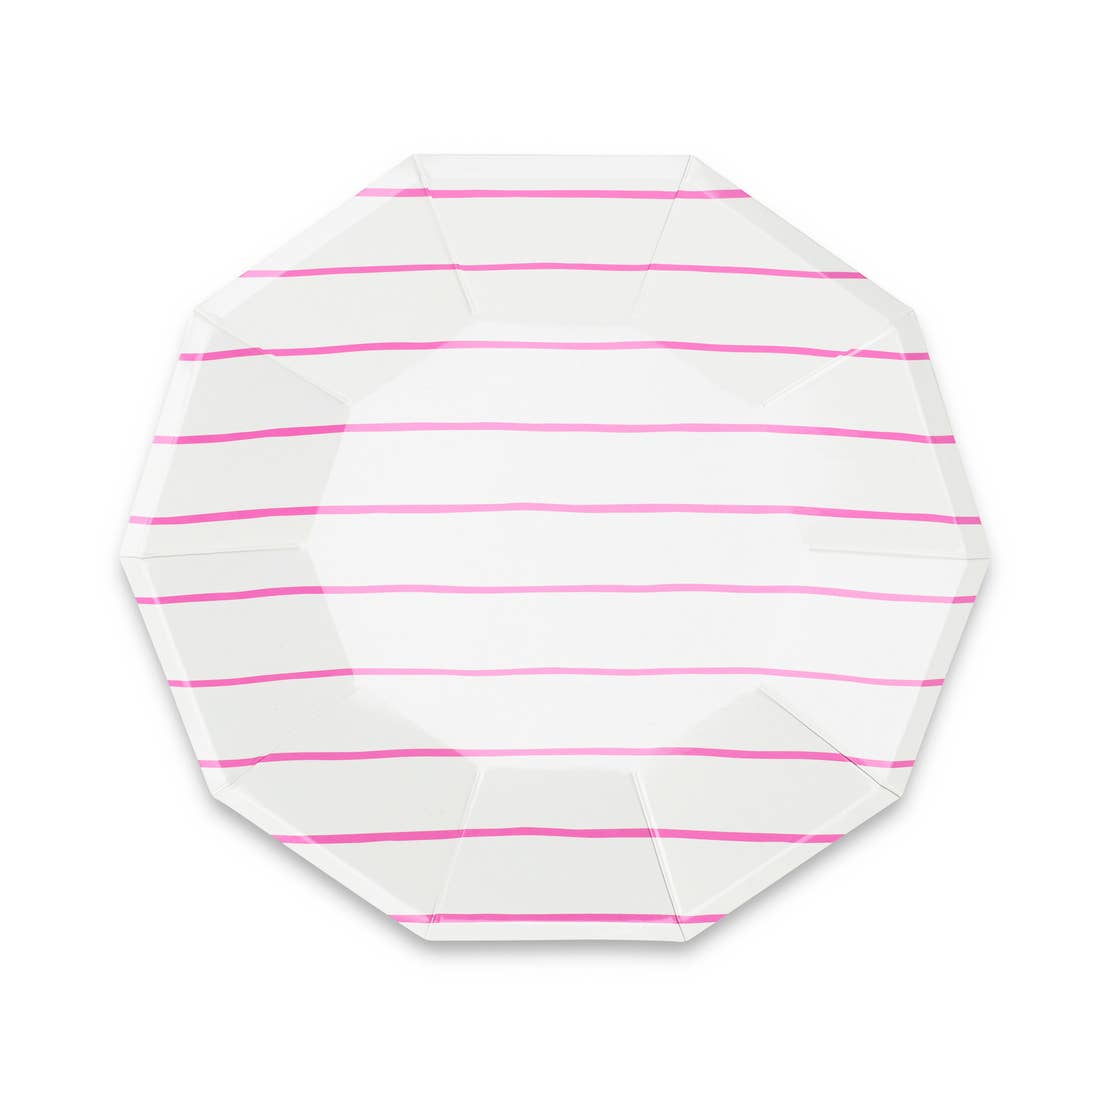 Frenchie Striped Large Plates in Cerise